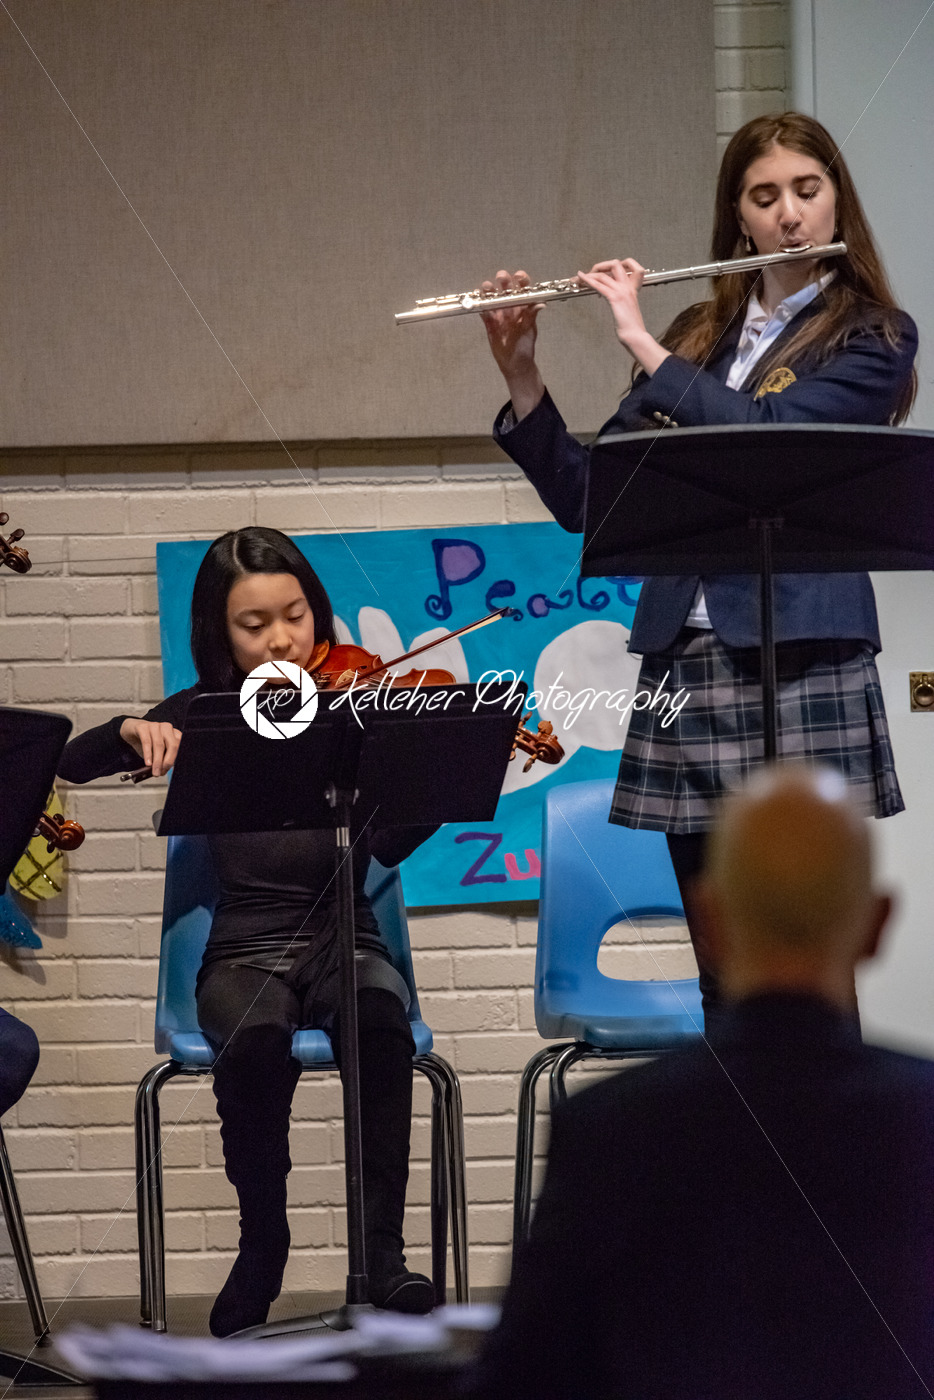 ROSEMONT, PA – DECEMBER 12, 2018: Middle and upper school winter concert at The Agnes Irwin School - Kelleher Photography Store